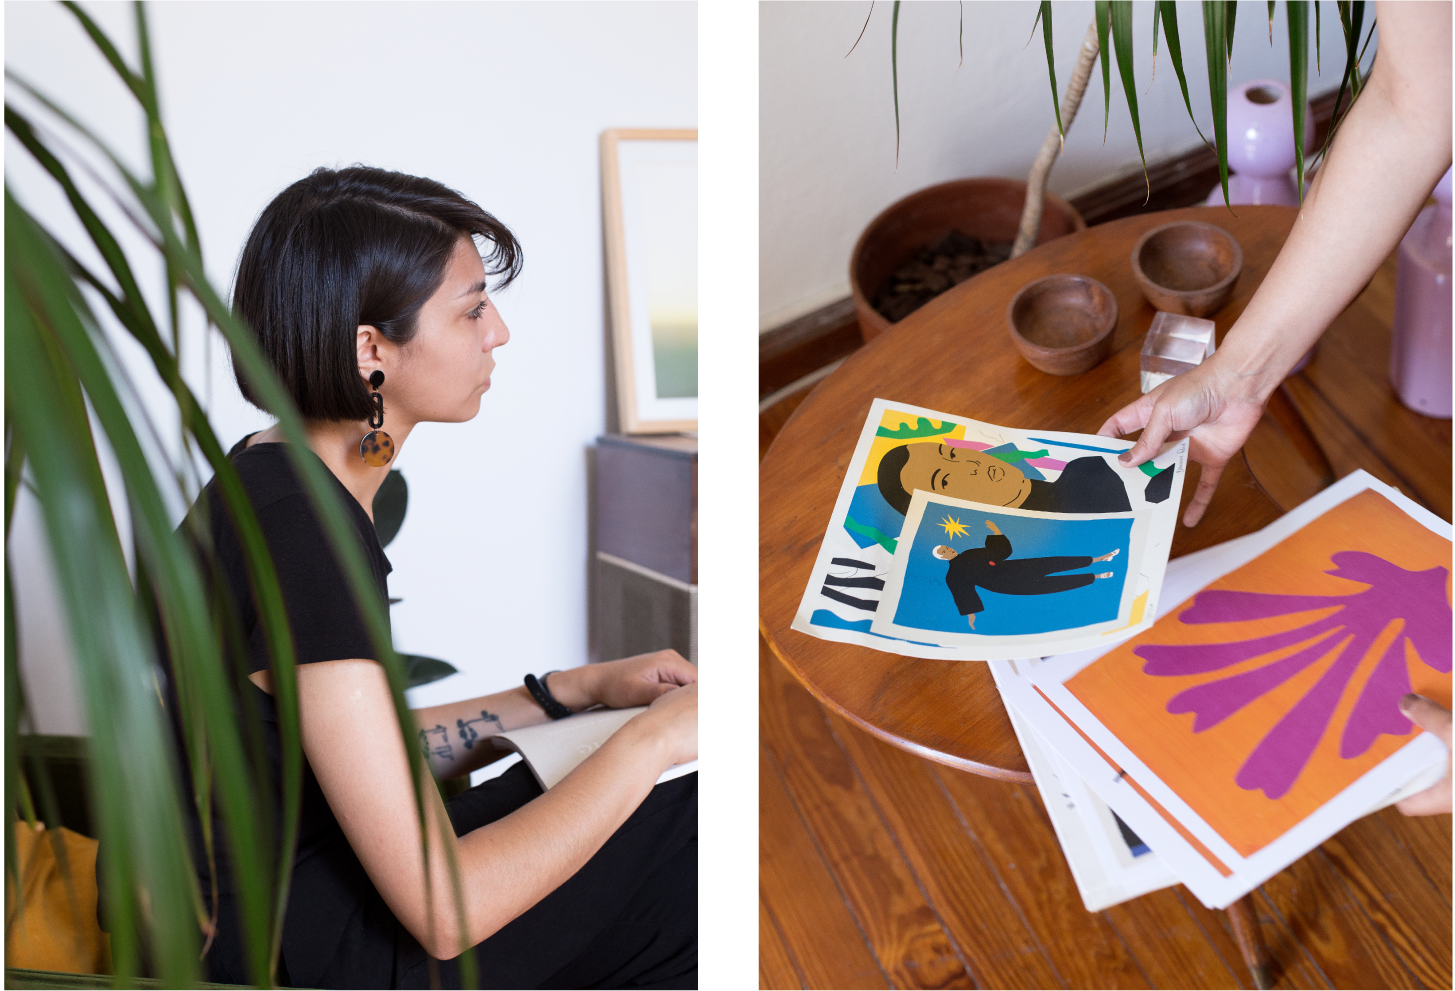 Left: Daiana perched in a favorite corner of her sunlit loft. Right: One of Daiana’s clear influences in her illustrations is the cut out work of Henri Matisse